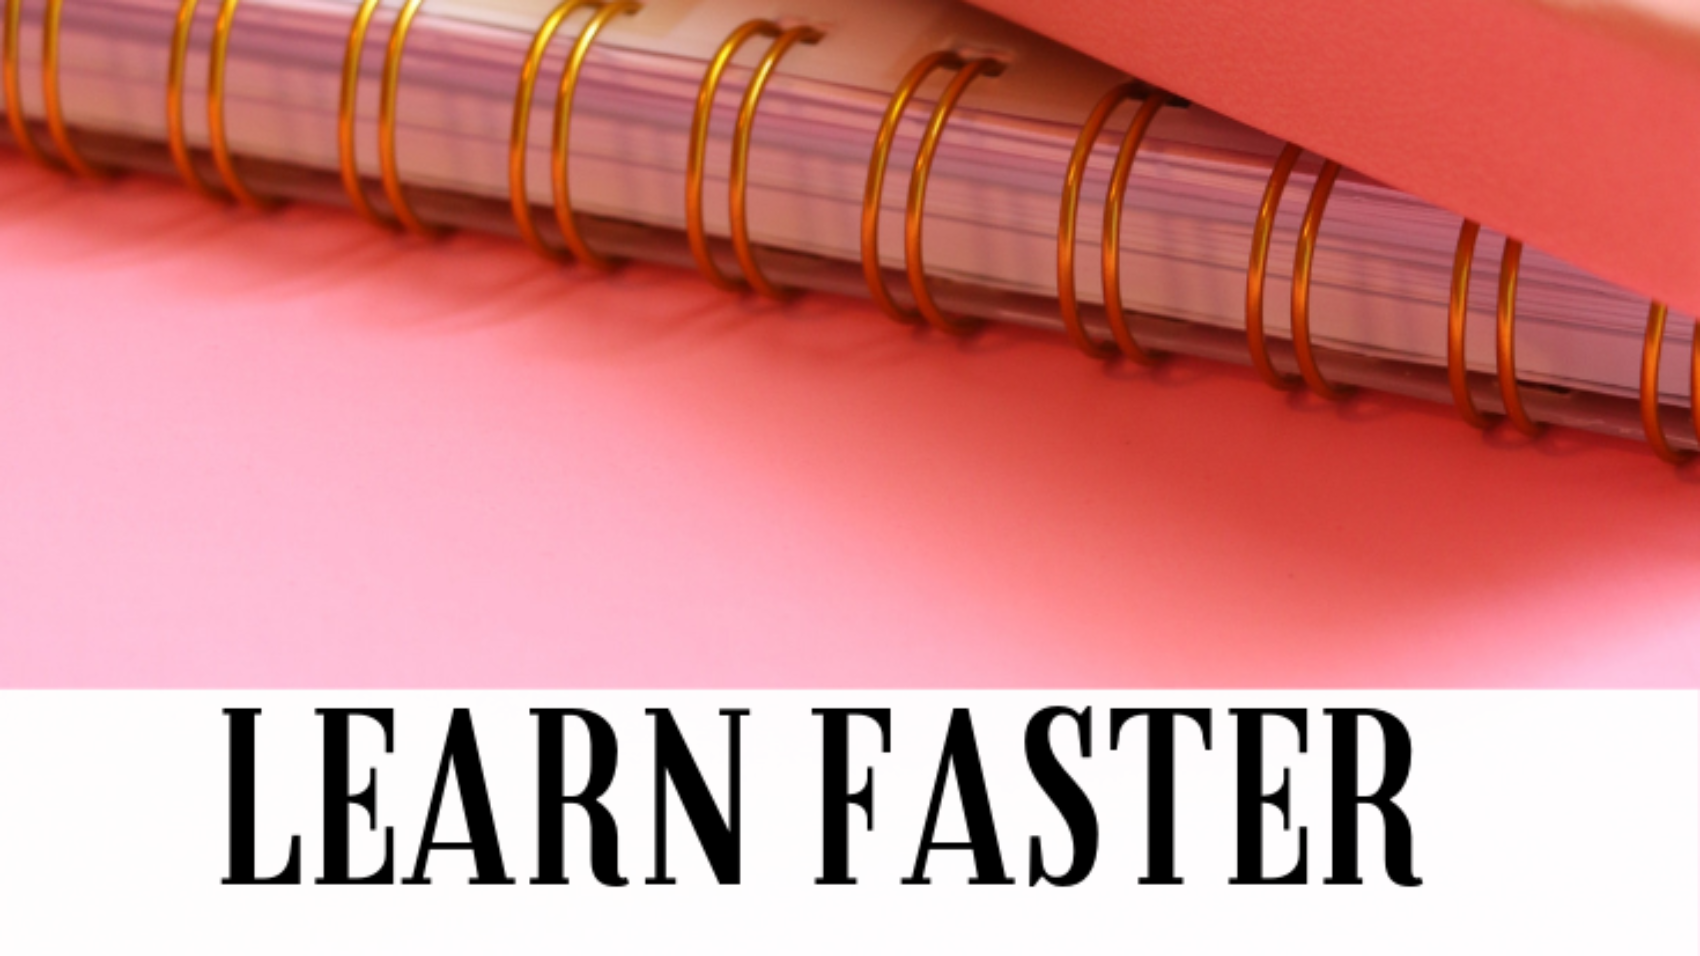 learn faster using self-hypnosis